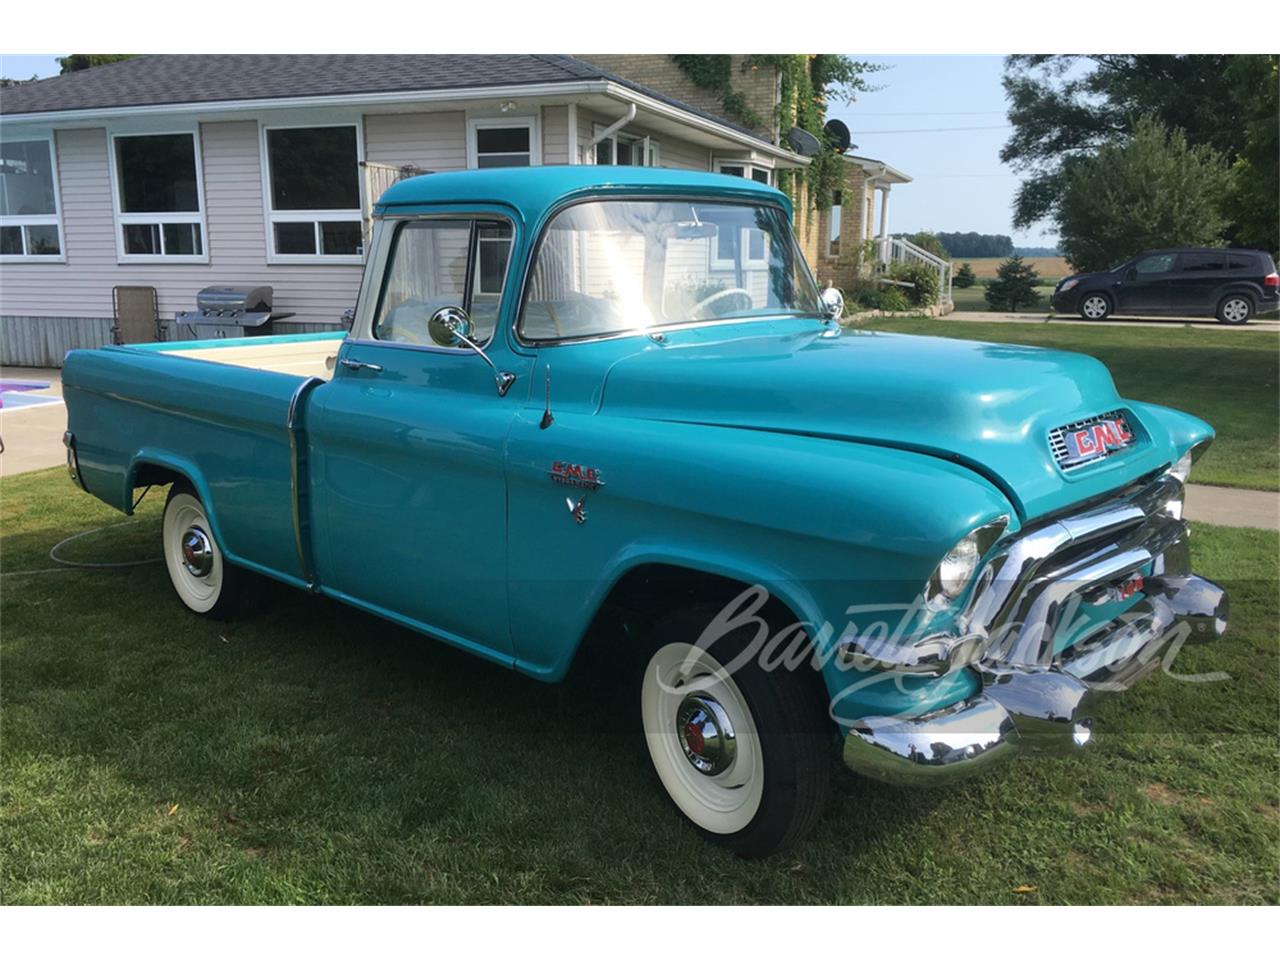 For Sale at Auction: 1956 GMC Suburban in Scottsdale, Arizona for sale in Scottsdale, AZ